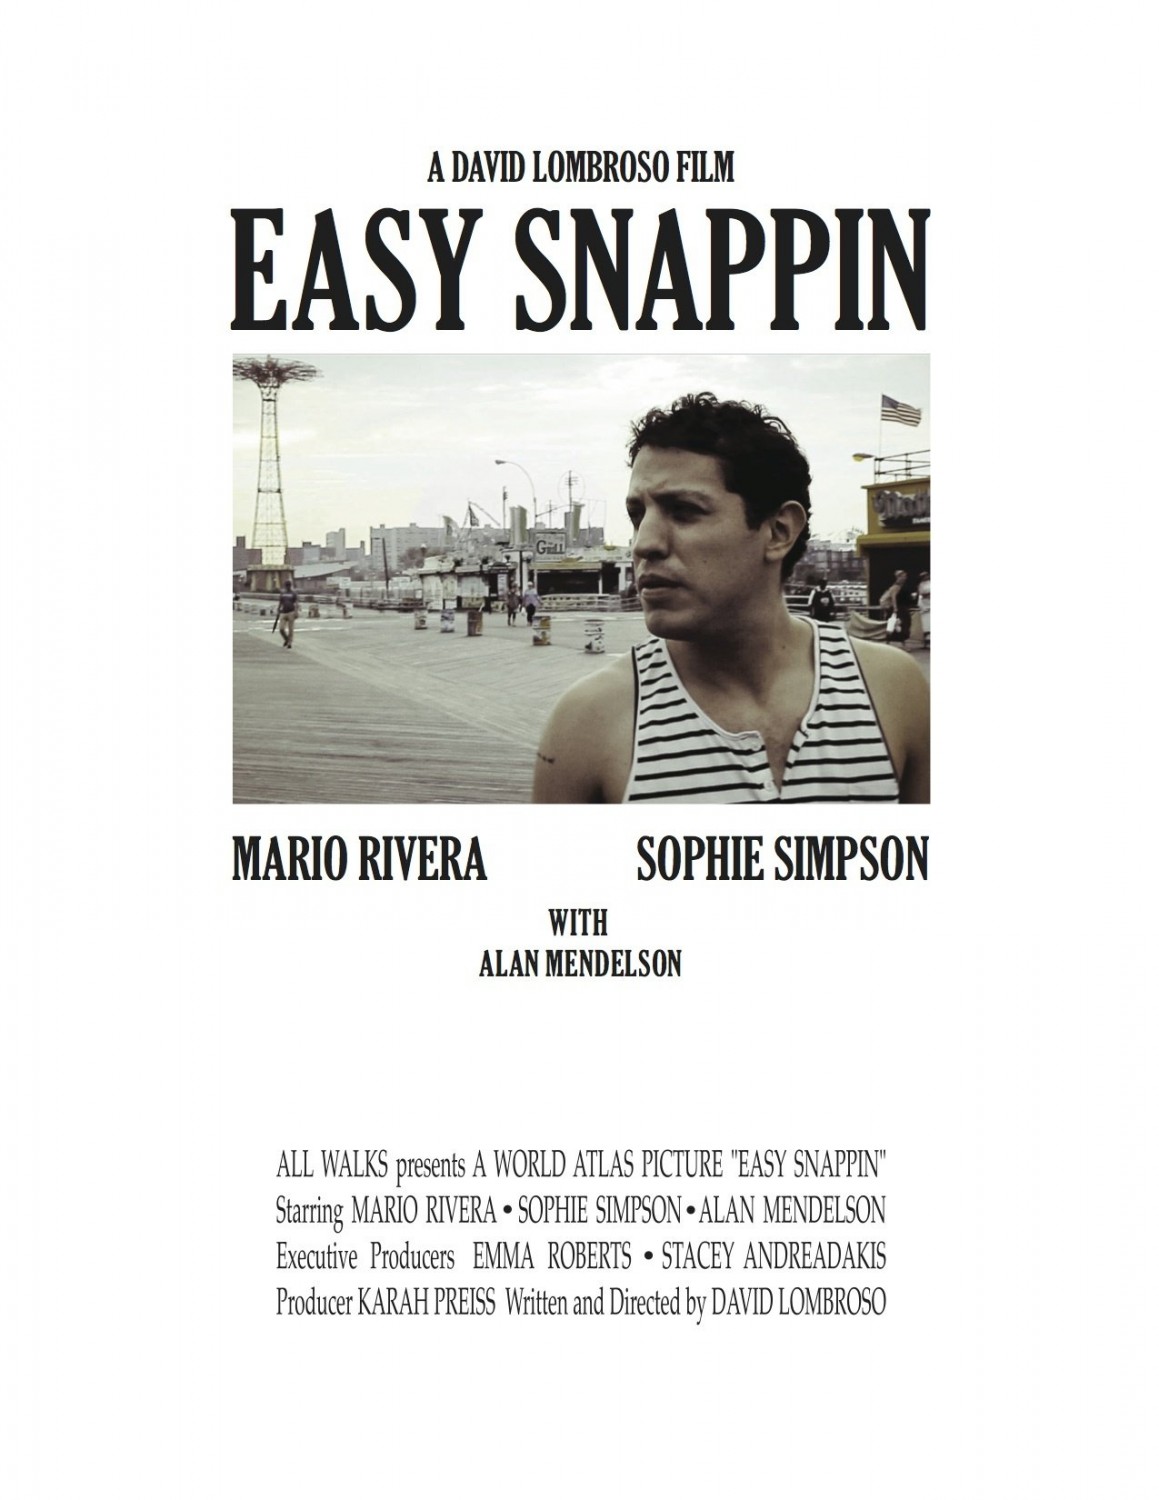 Extra Large Movie Poster Image for Easy Snappin